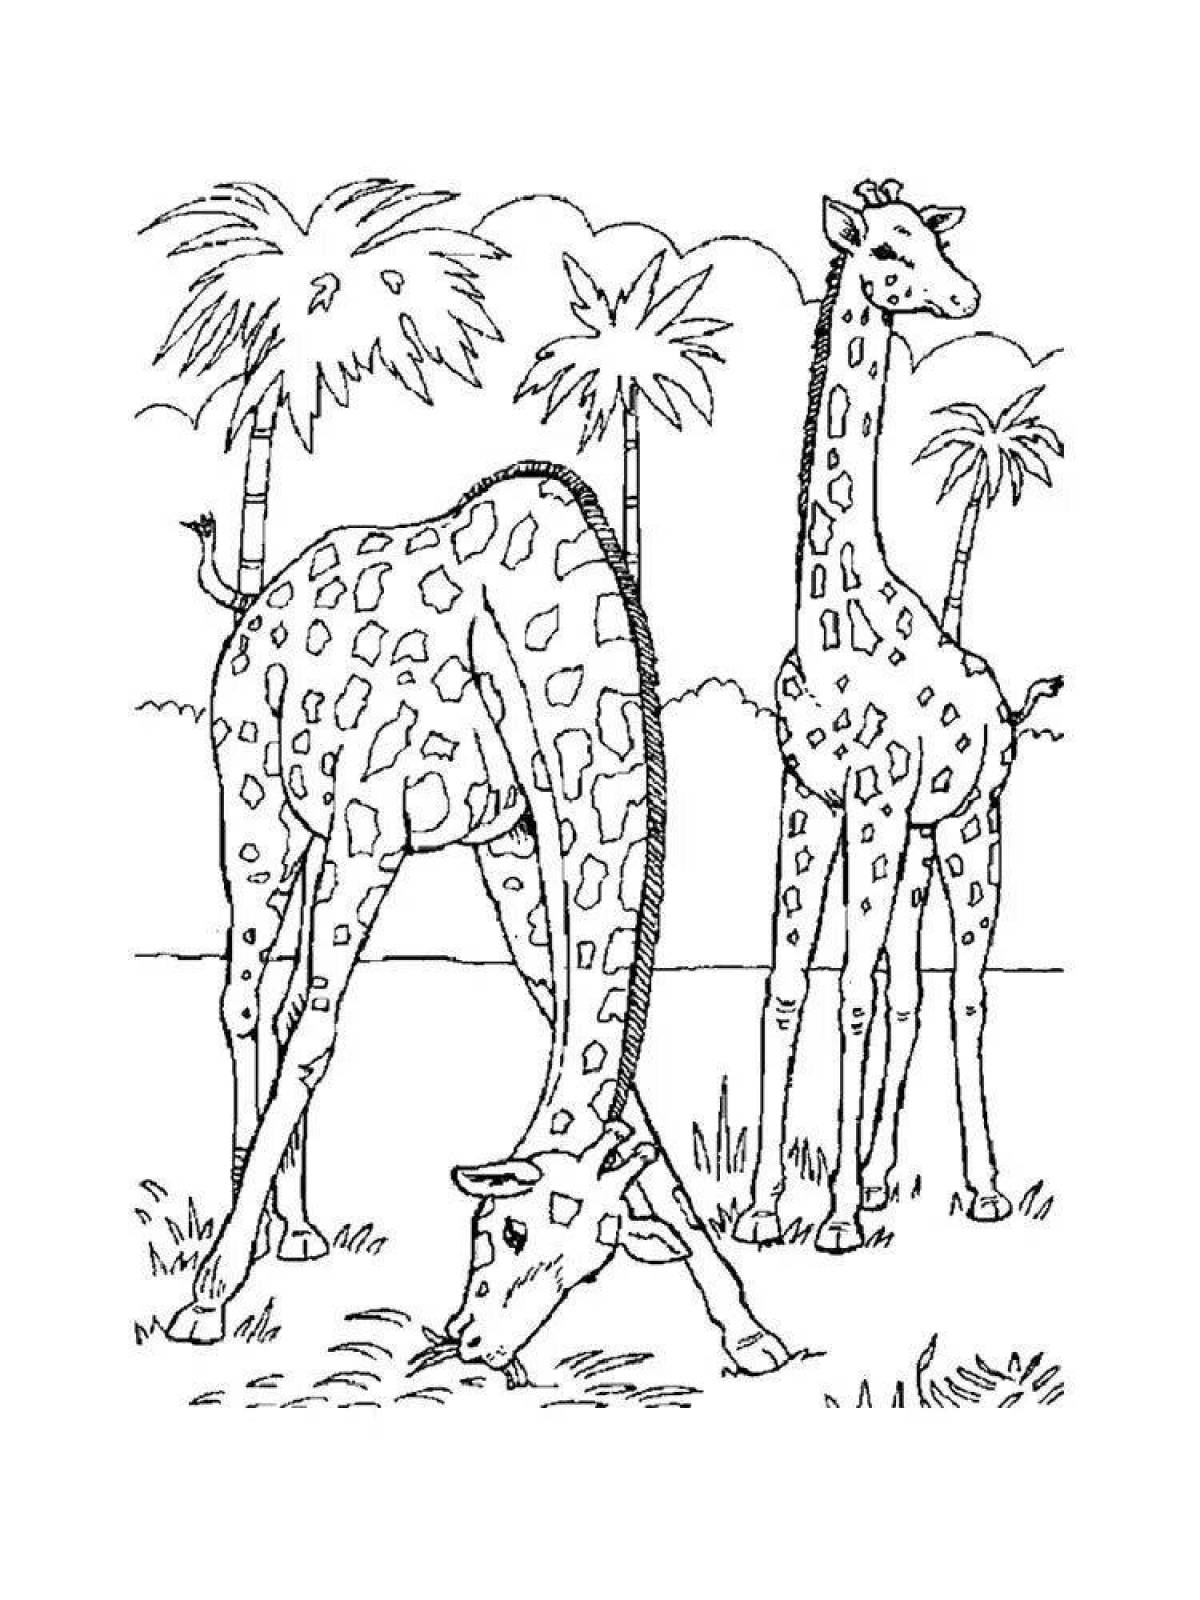 Amazing coloring pages for kids with animals from hot countries